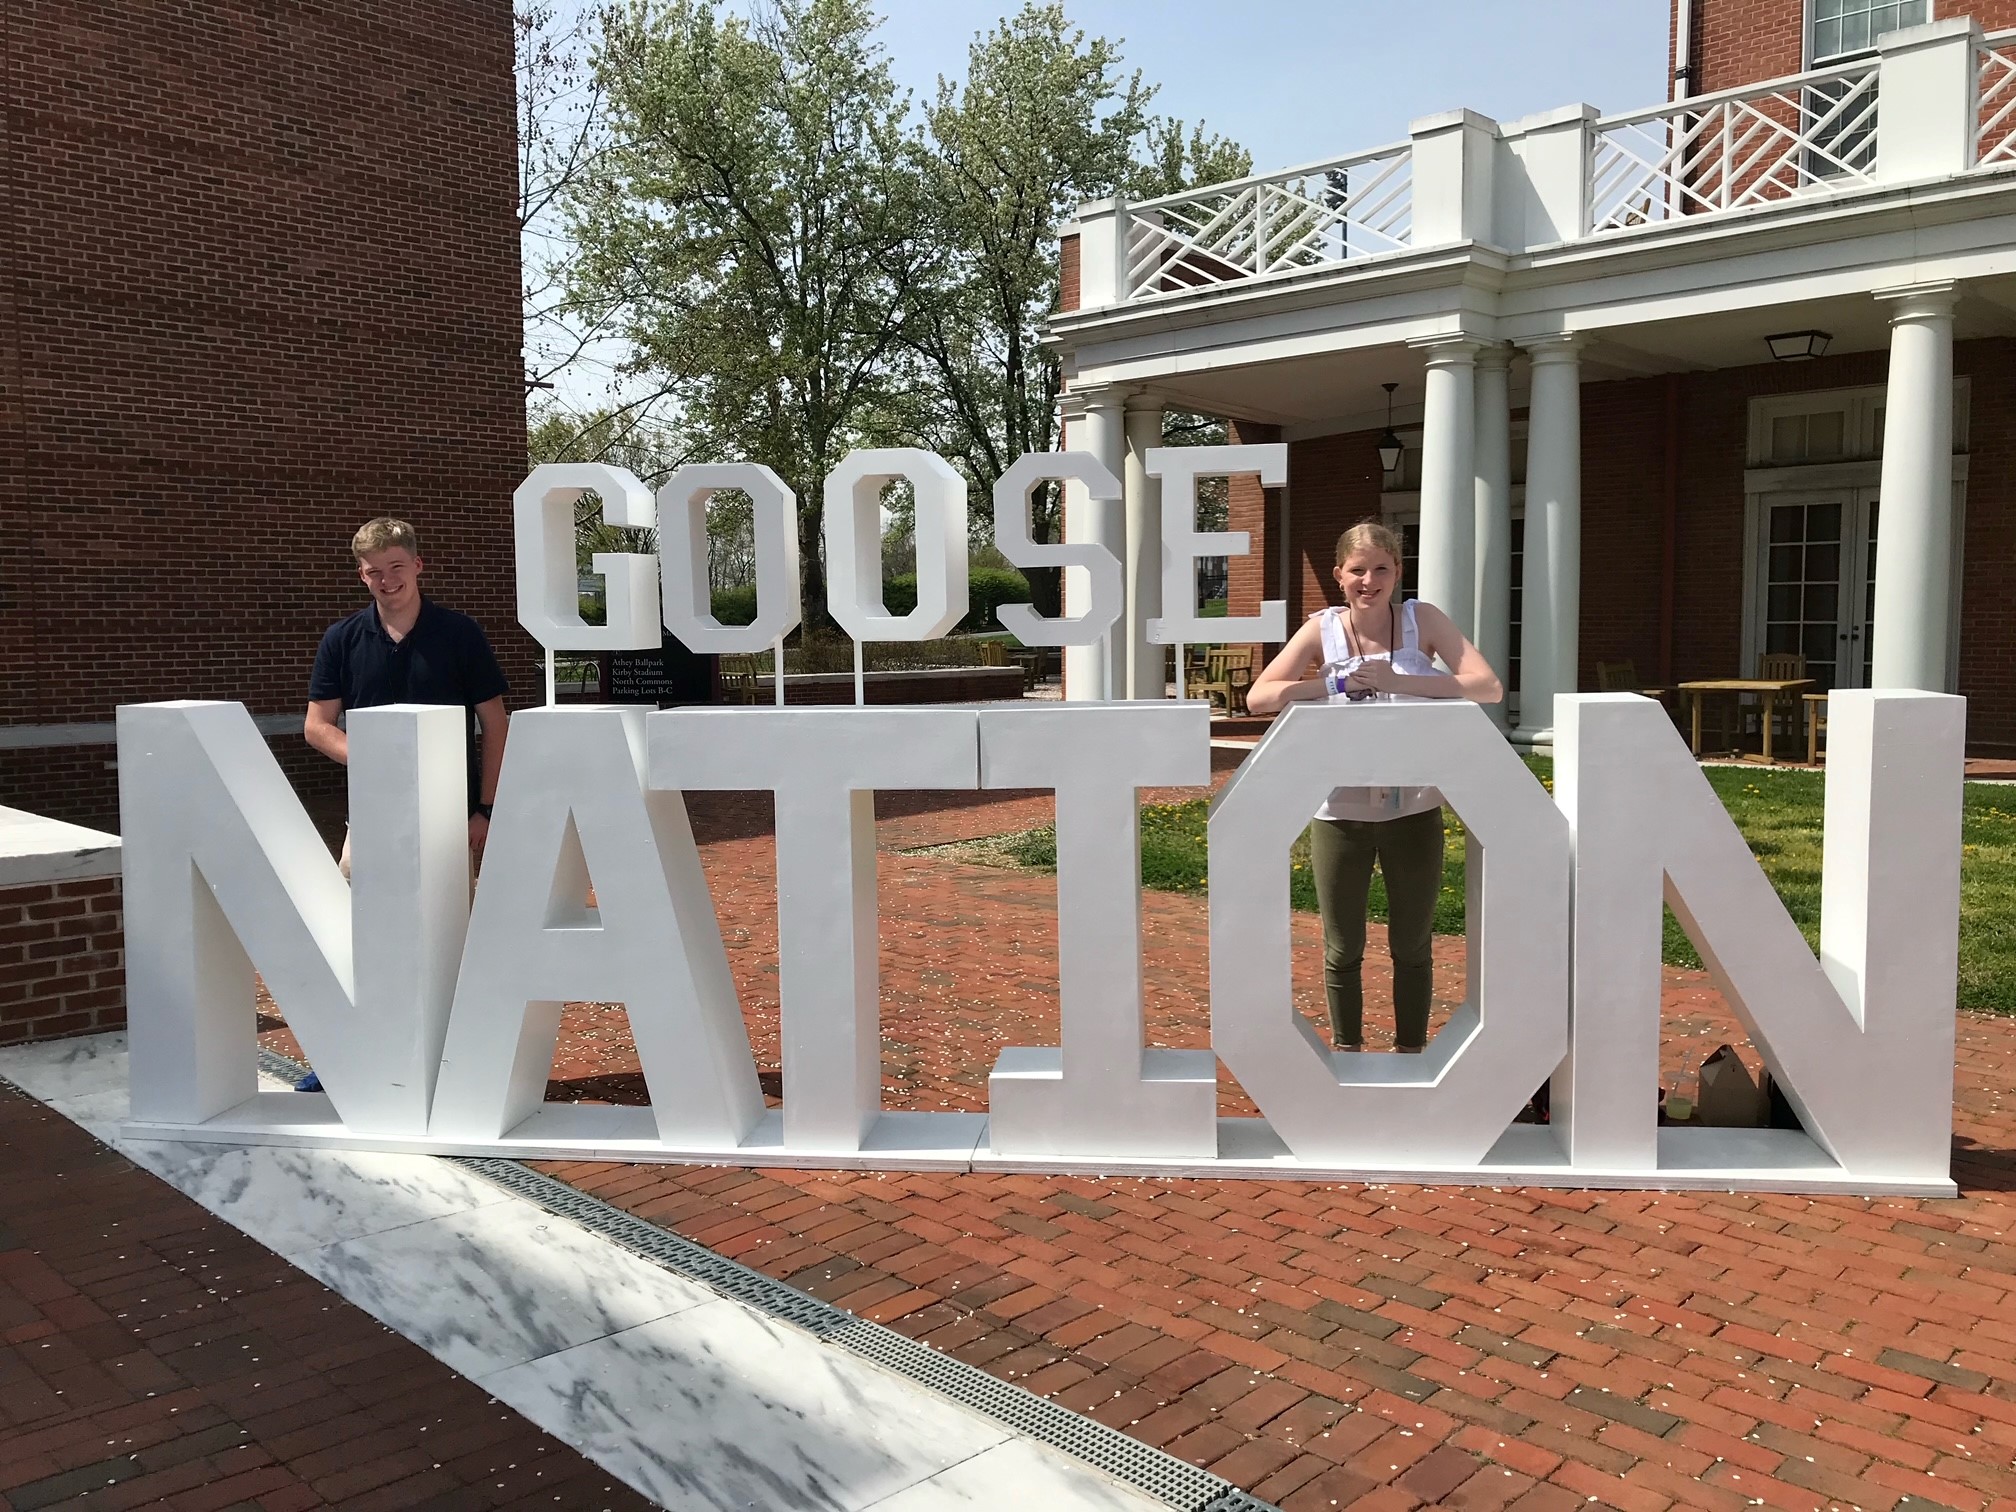 Osucha twins Kaitlin and Zach stand in Martha Washington Square behind large white "Goose Nation" sign.